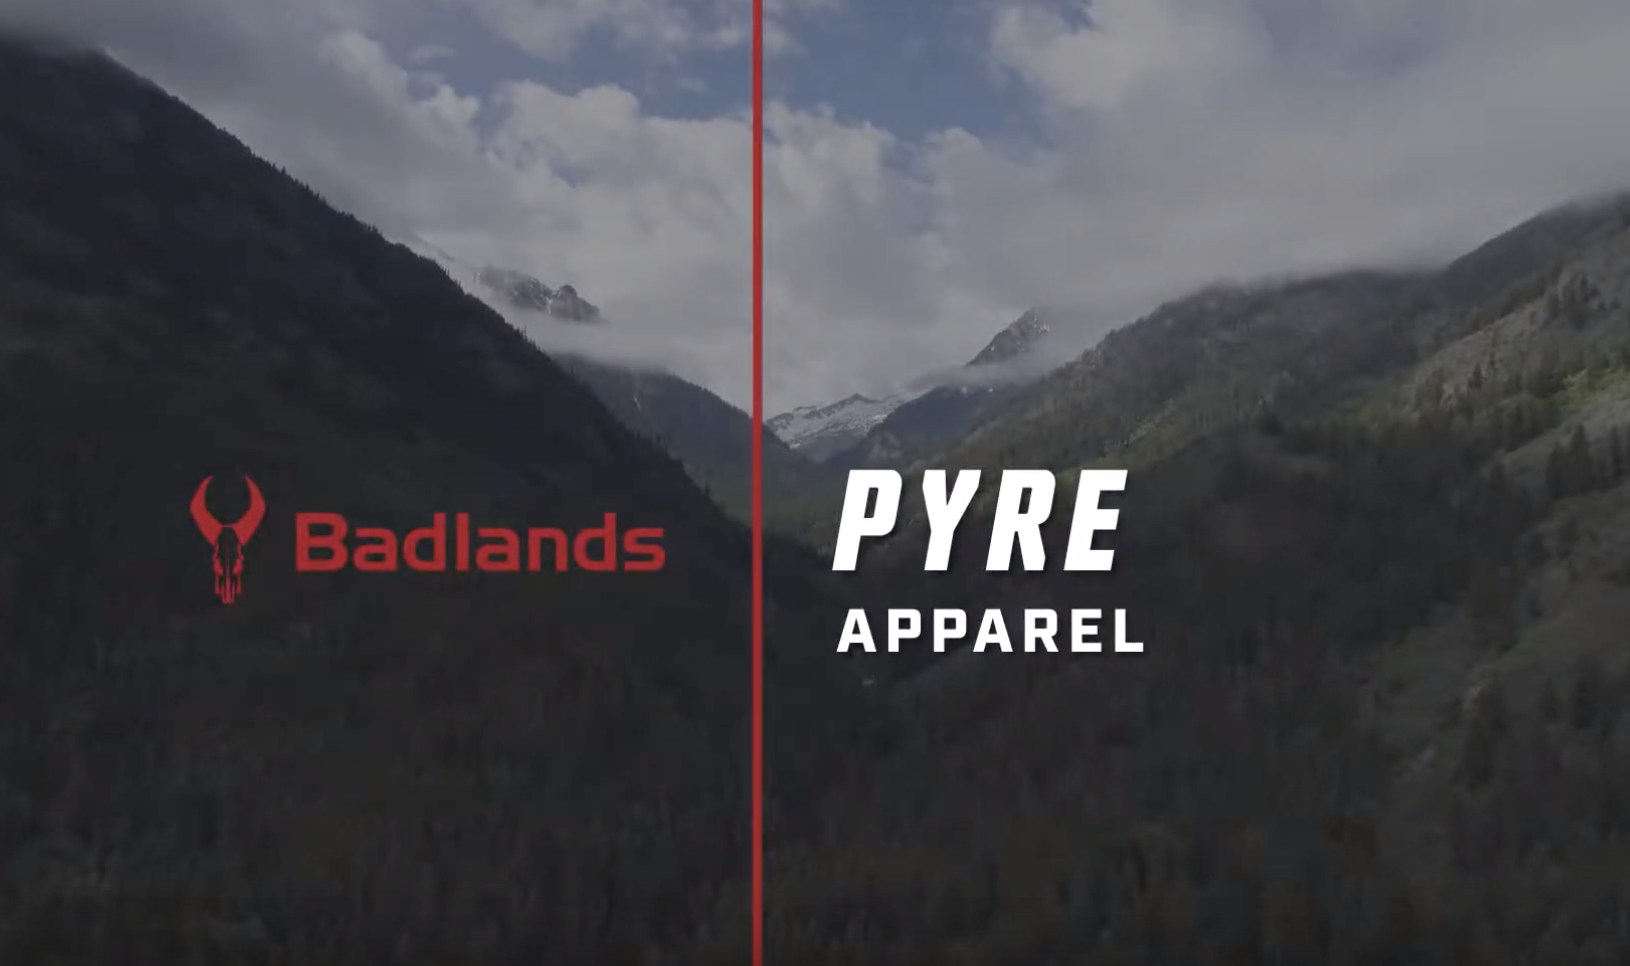 LEARN MORE ABOUT THE PYRE APPAREL